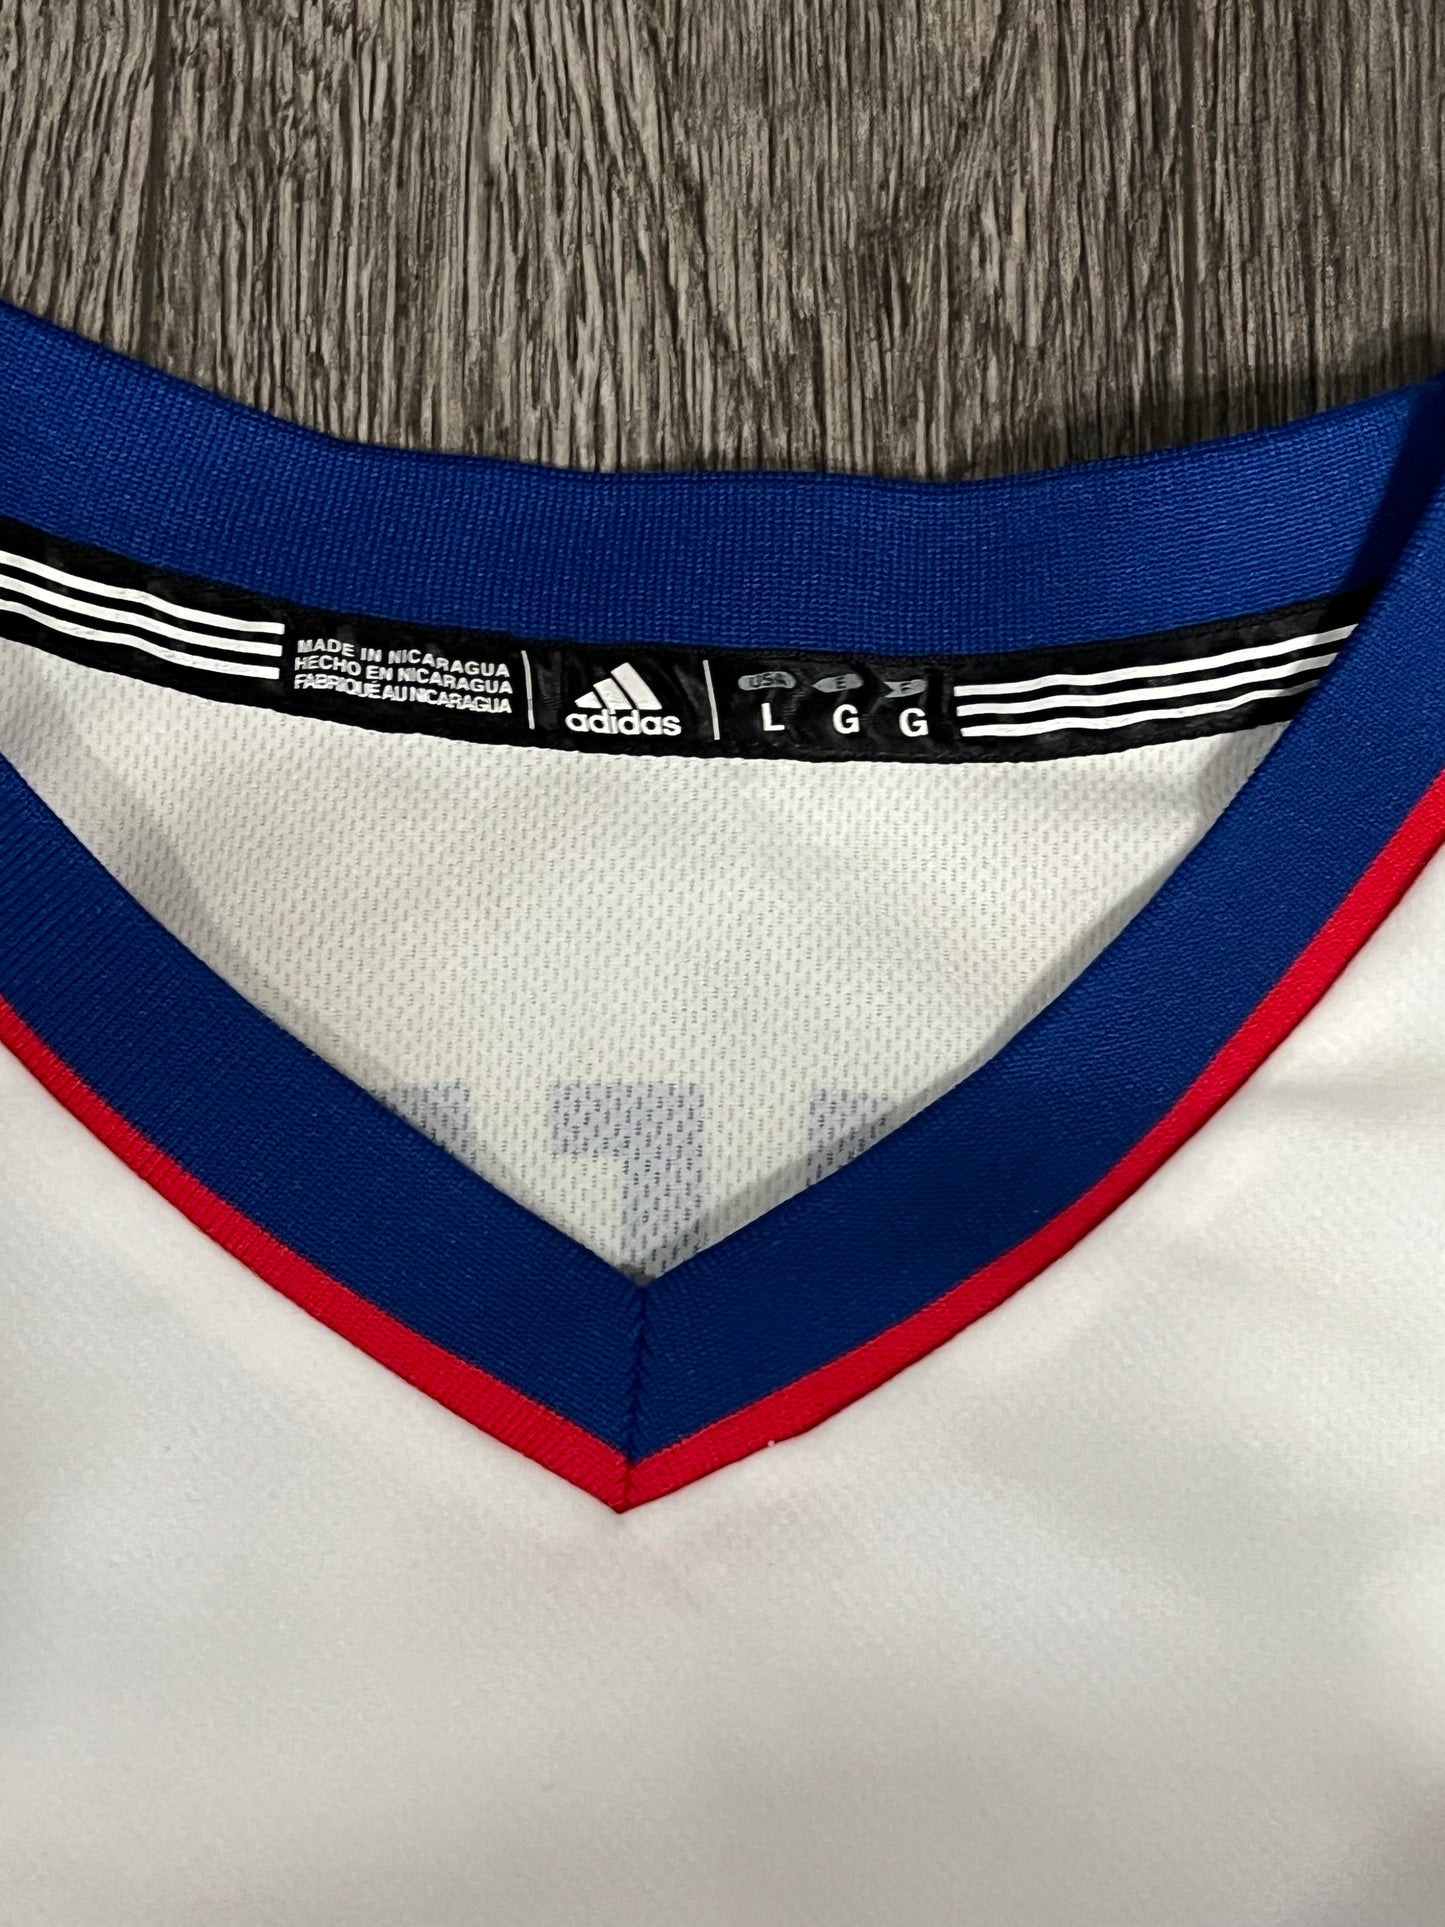 Blake Griffin Large LA Clippers Adidas Jersey